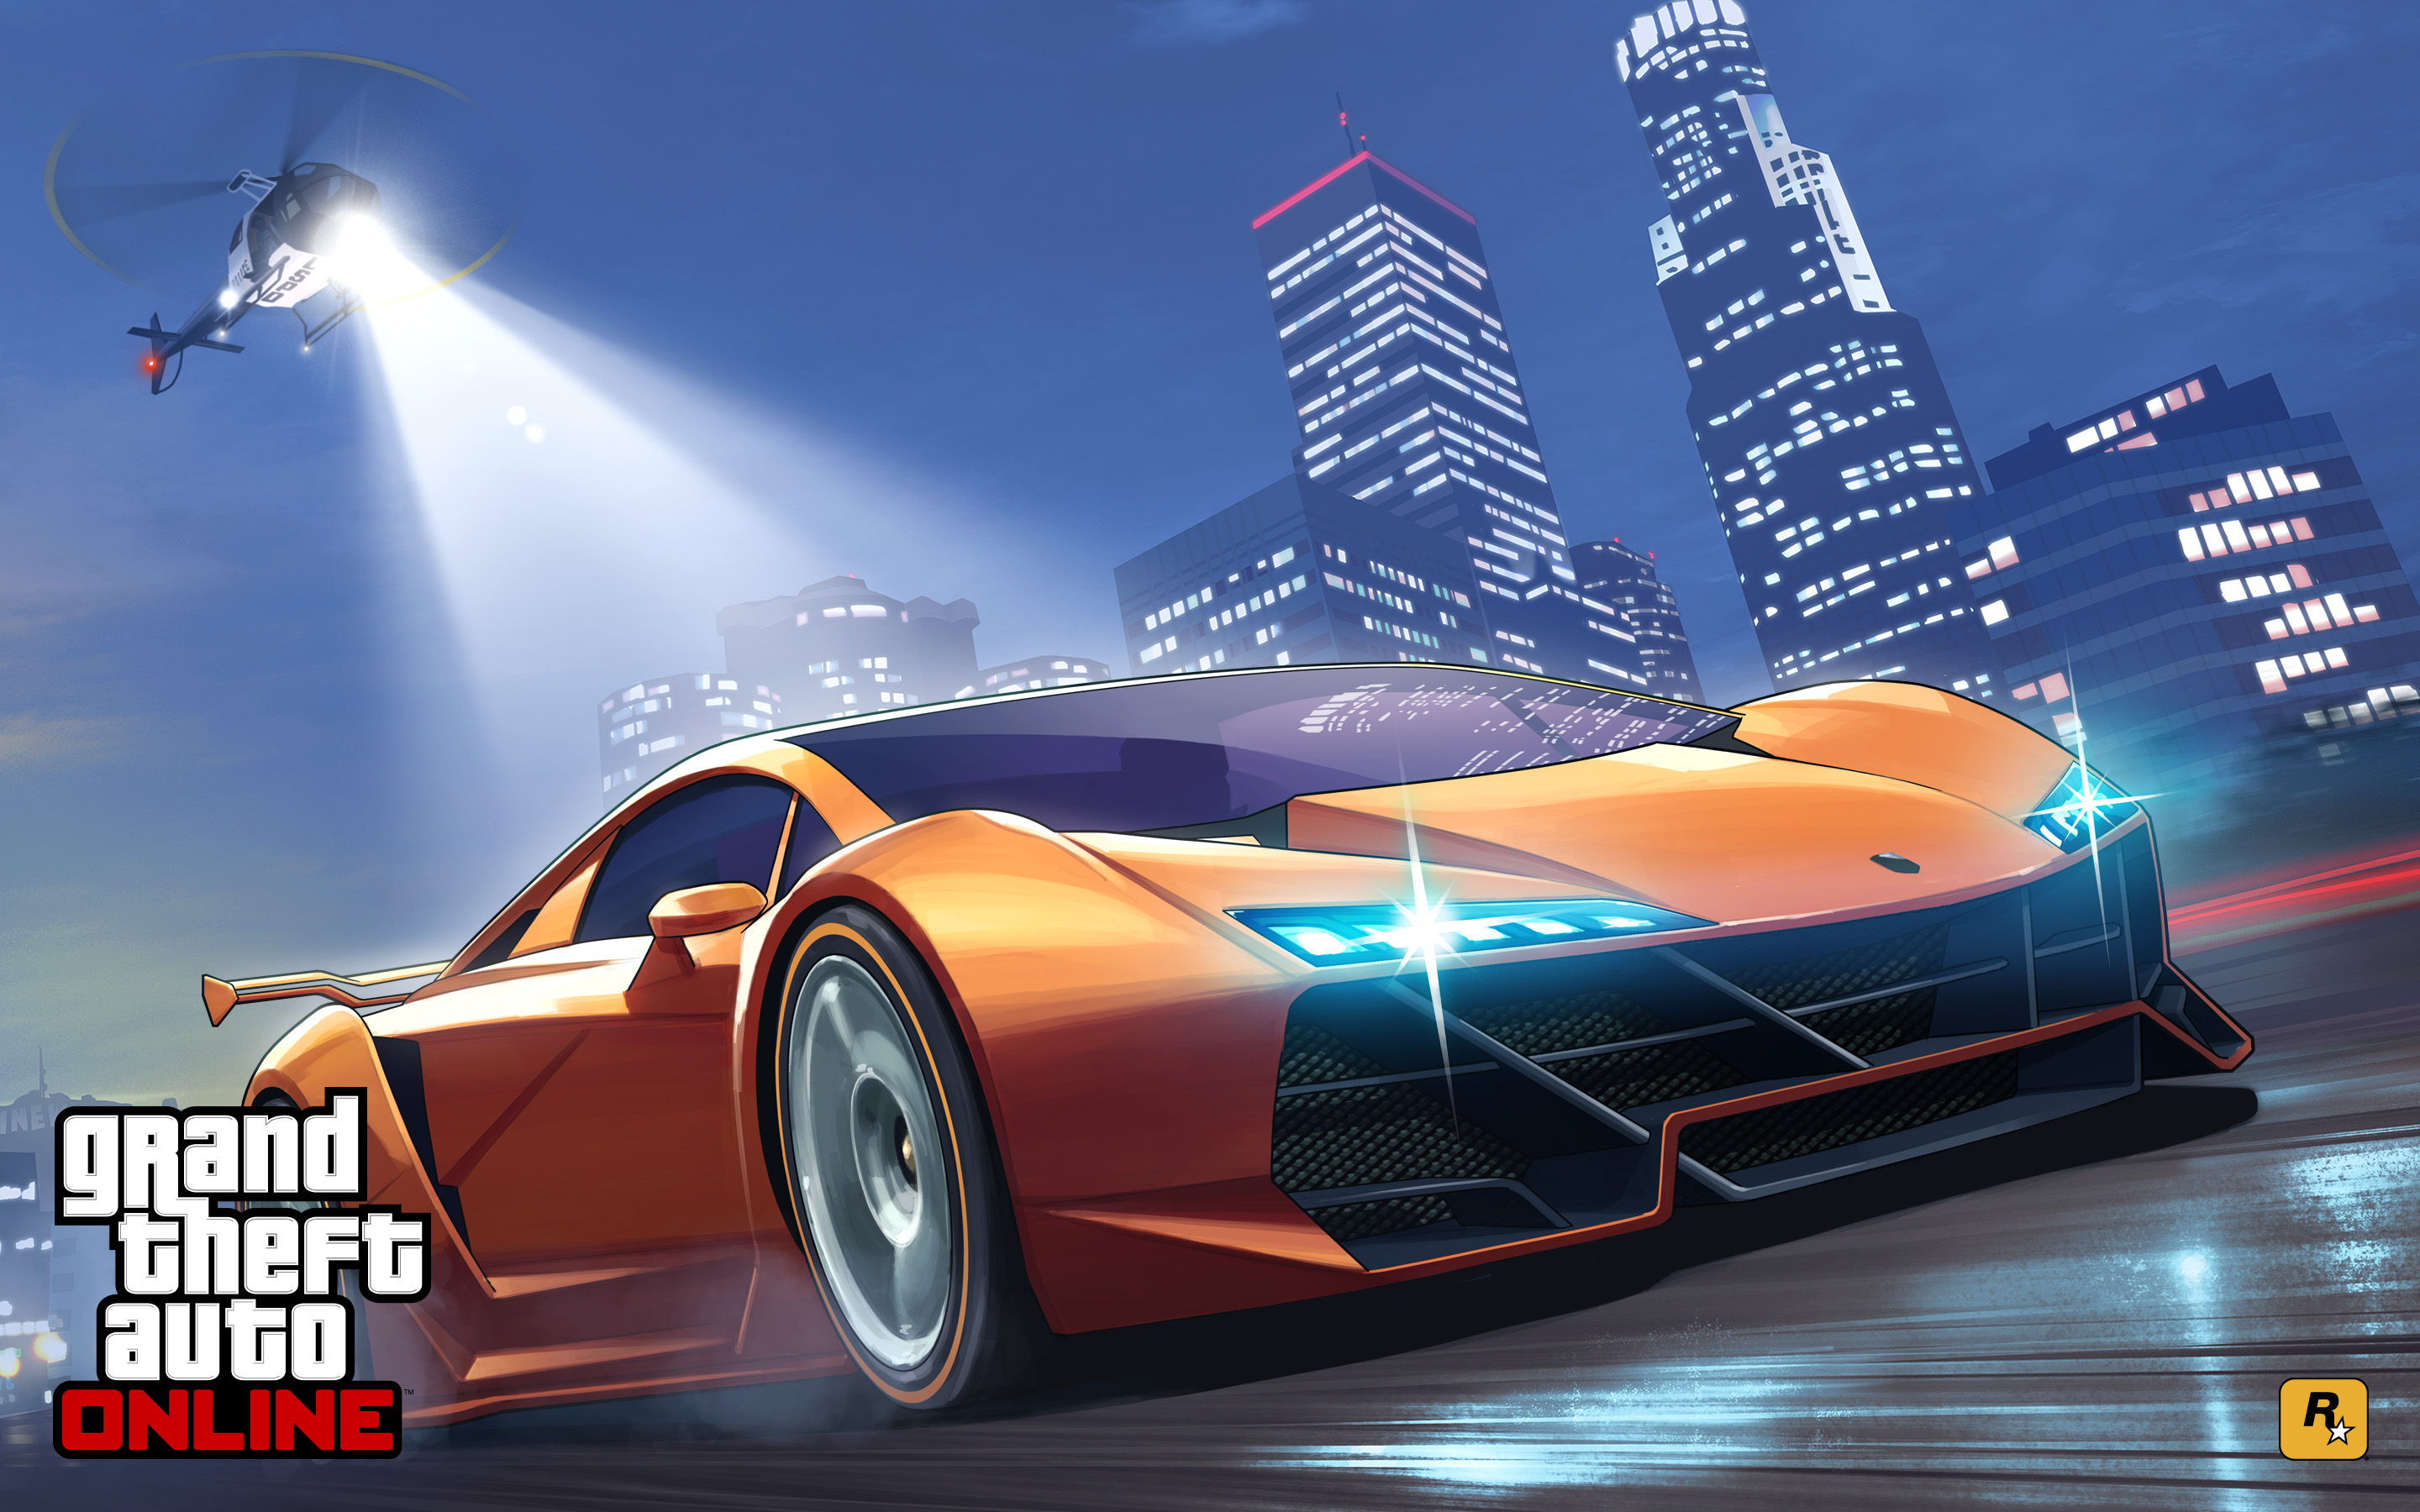 Grand Theft Auto Online 2015 Wallpapers HD Wallpapers